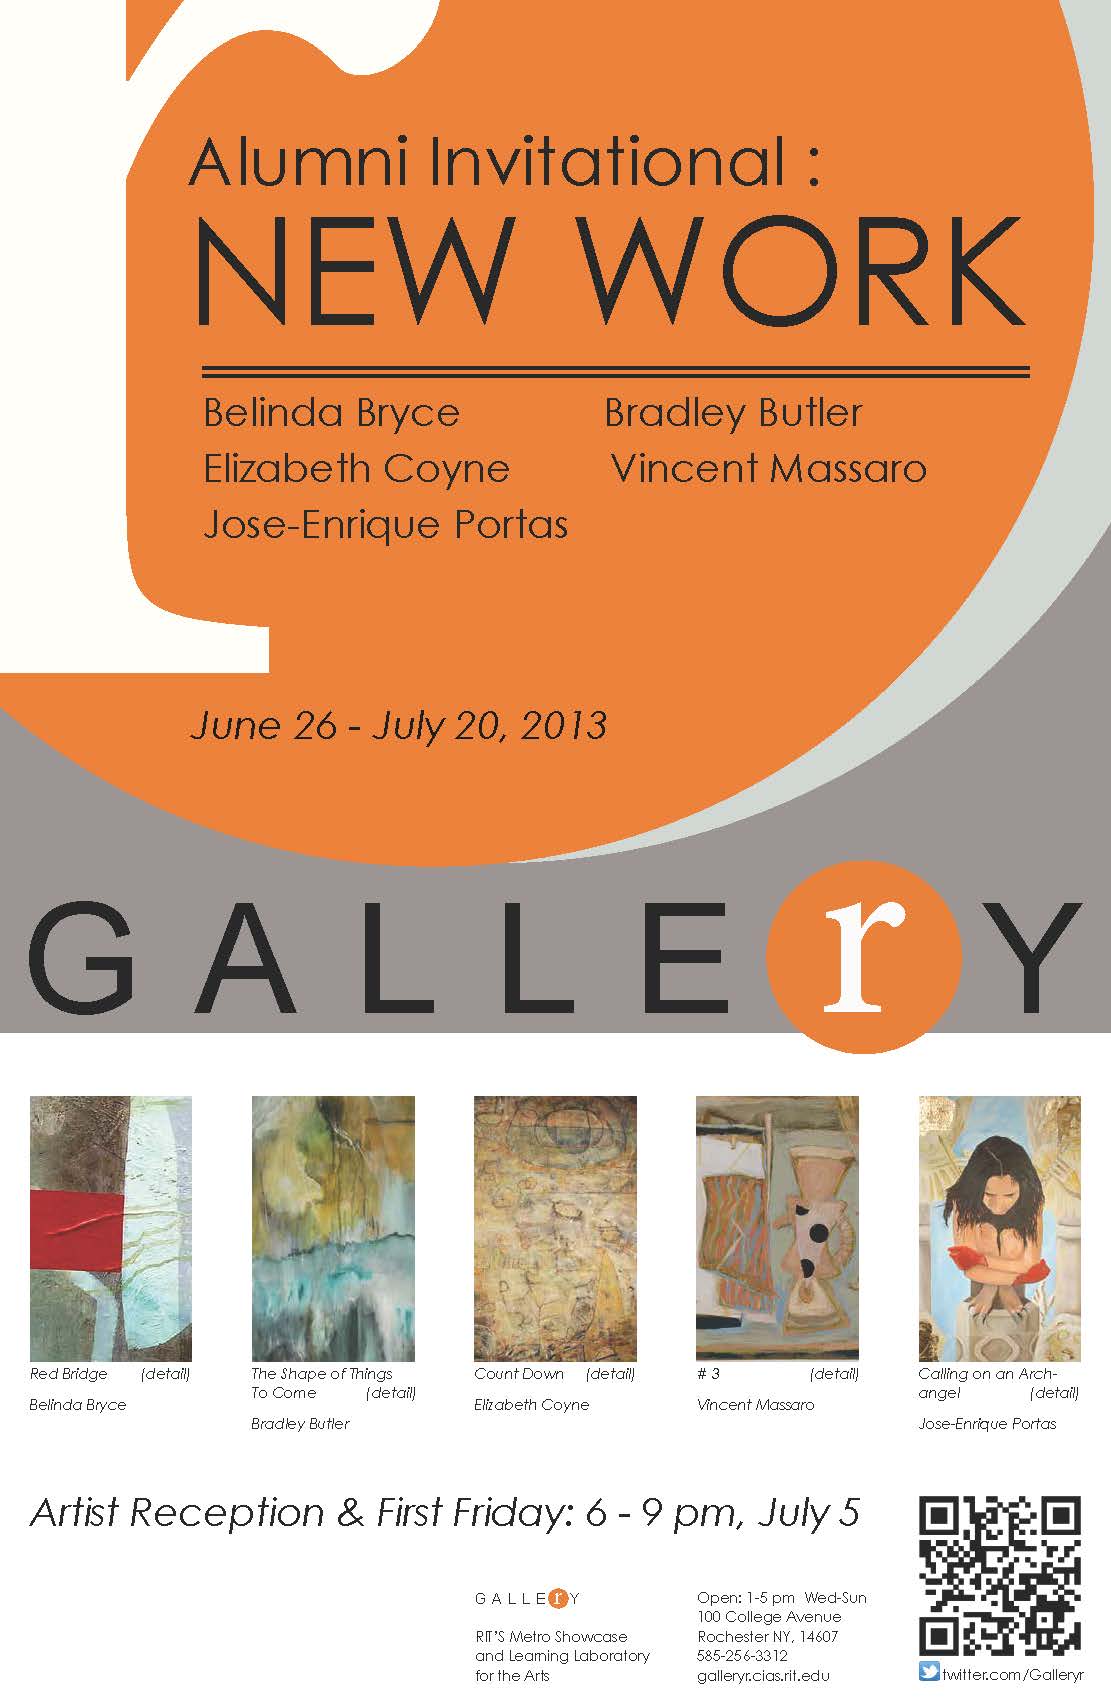 Poster with exhibition info and 5 small images of work from the show